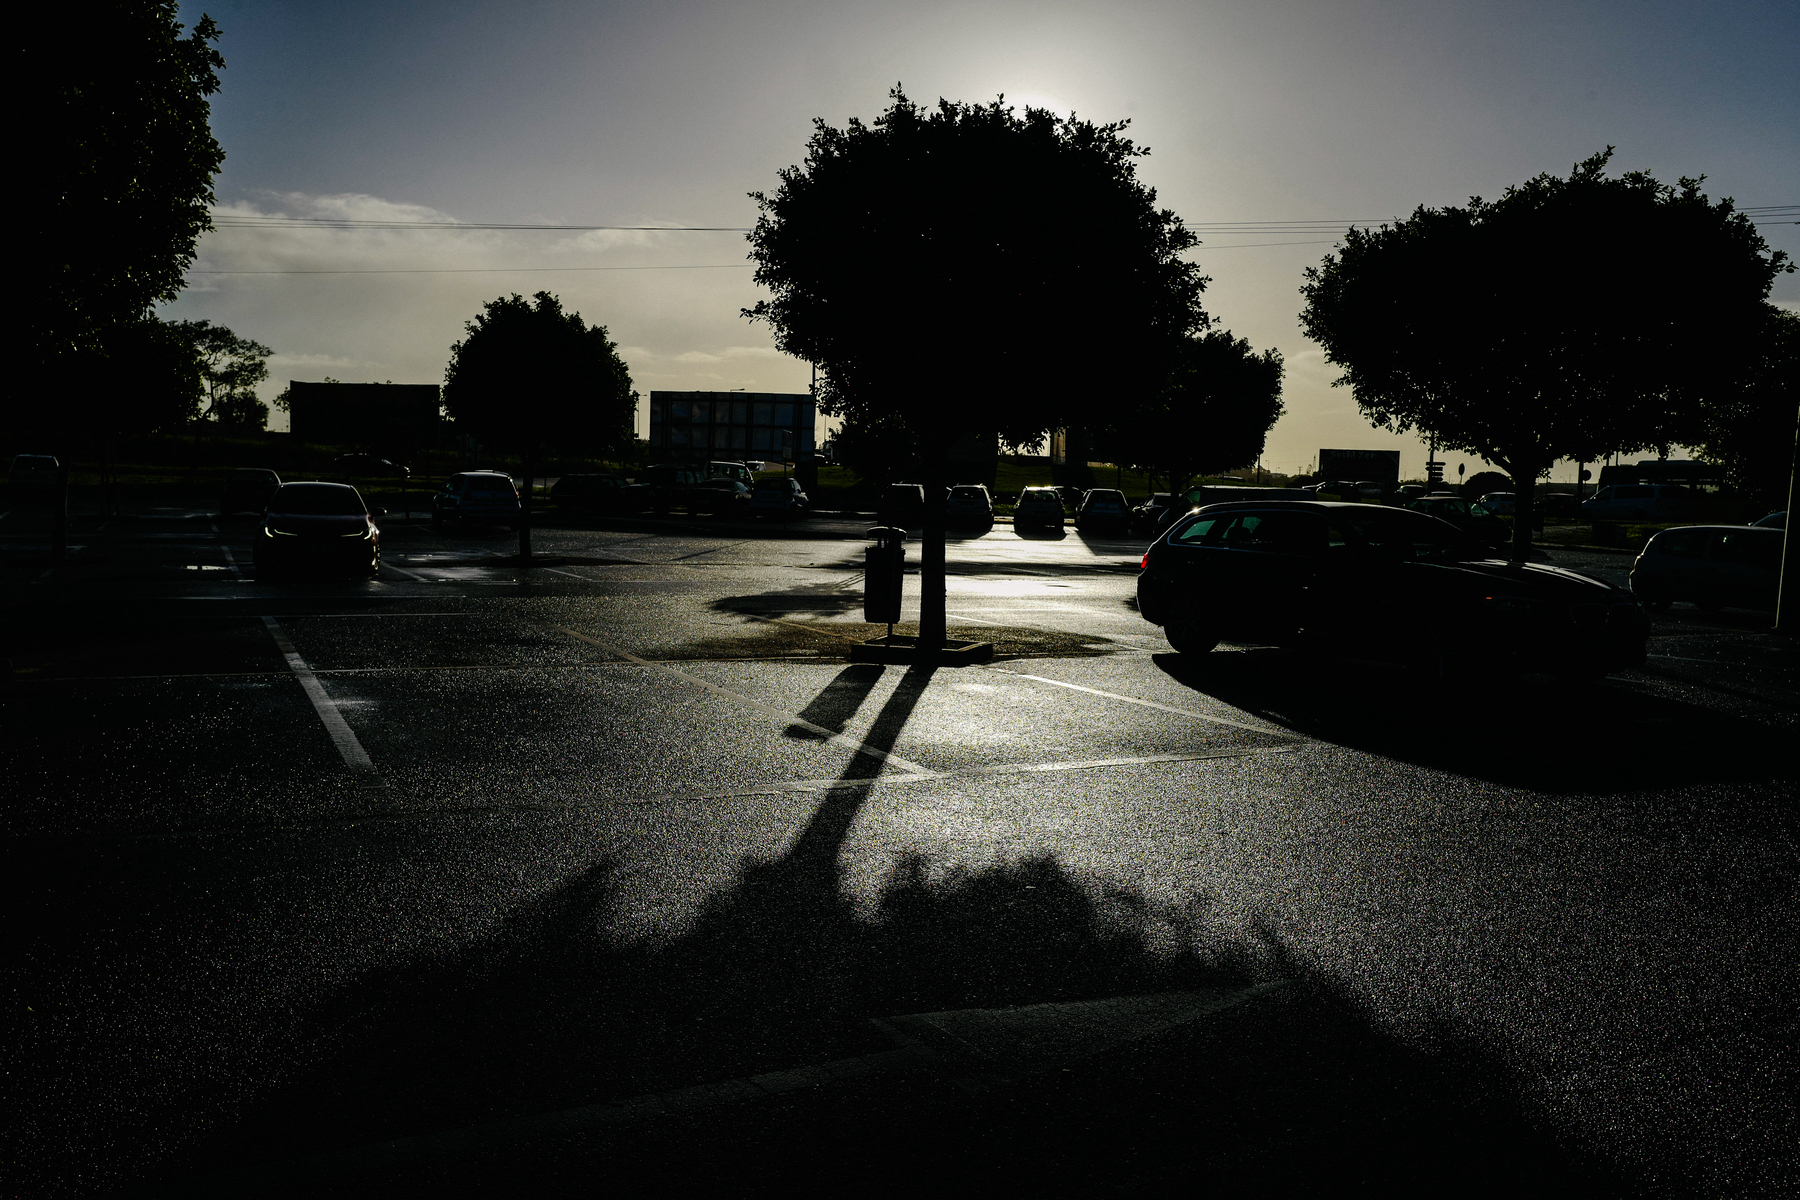 A parking lot with vehicles, silhouetted trees, and shadows cast on the ground by a low sun.